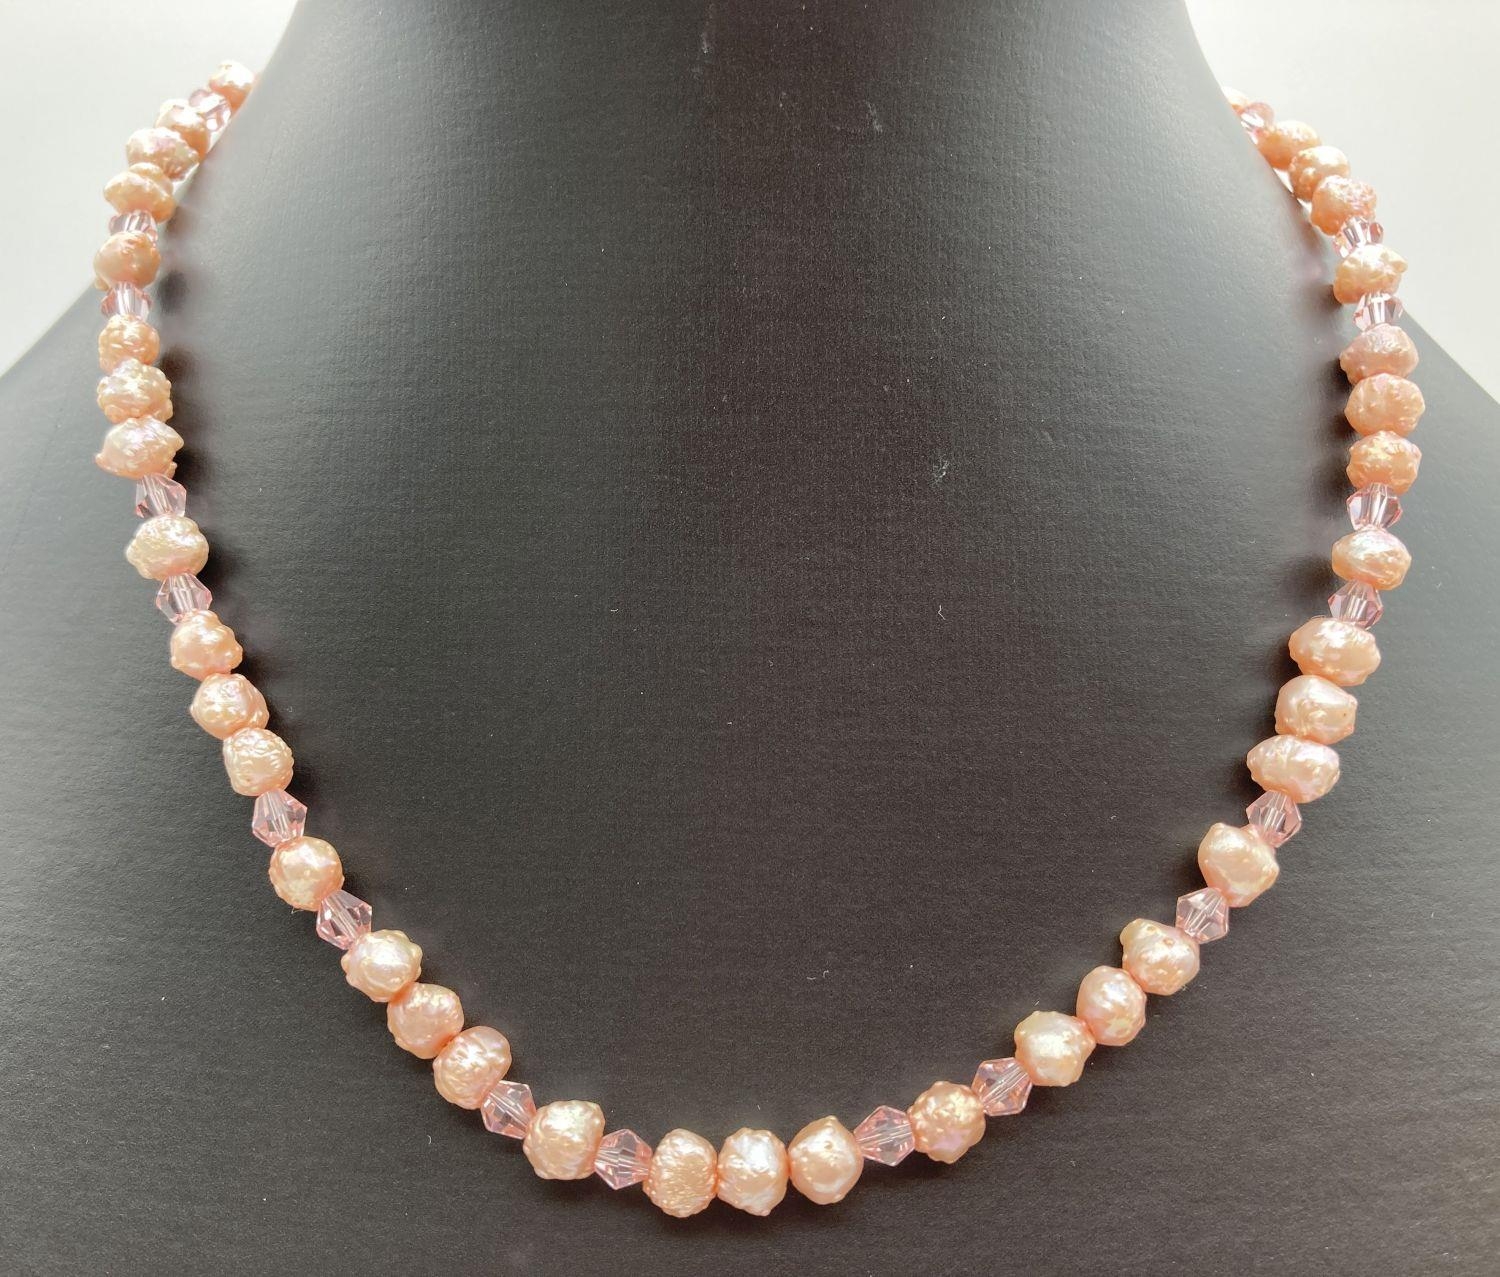 A 16" pink freshwater pearl and faceted glass bead necklace with magnetic barrel clasp. Retired